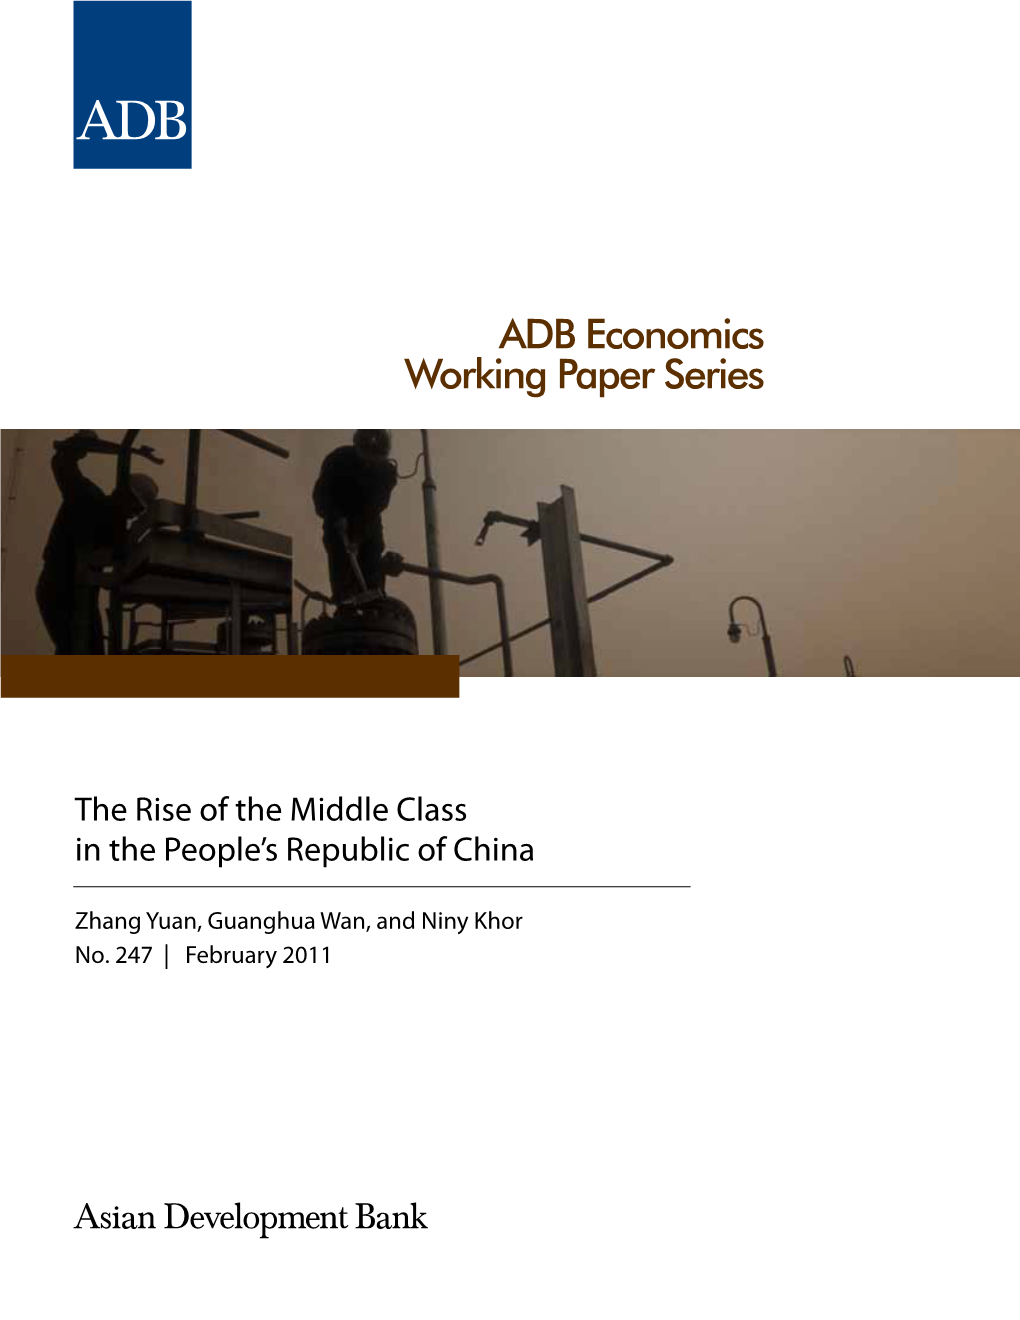 The Rise of the Middle Class in the People's Republic of China (No. 247)